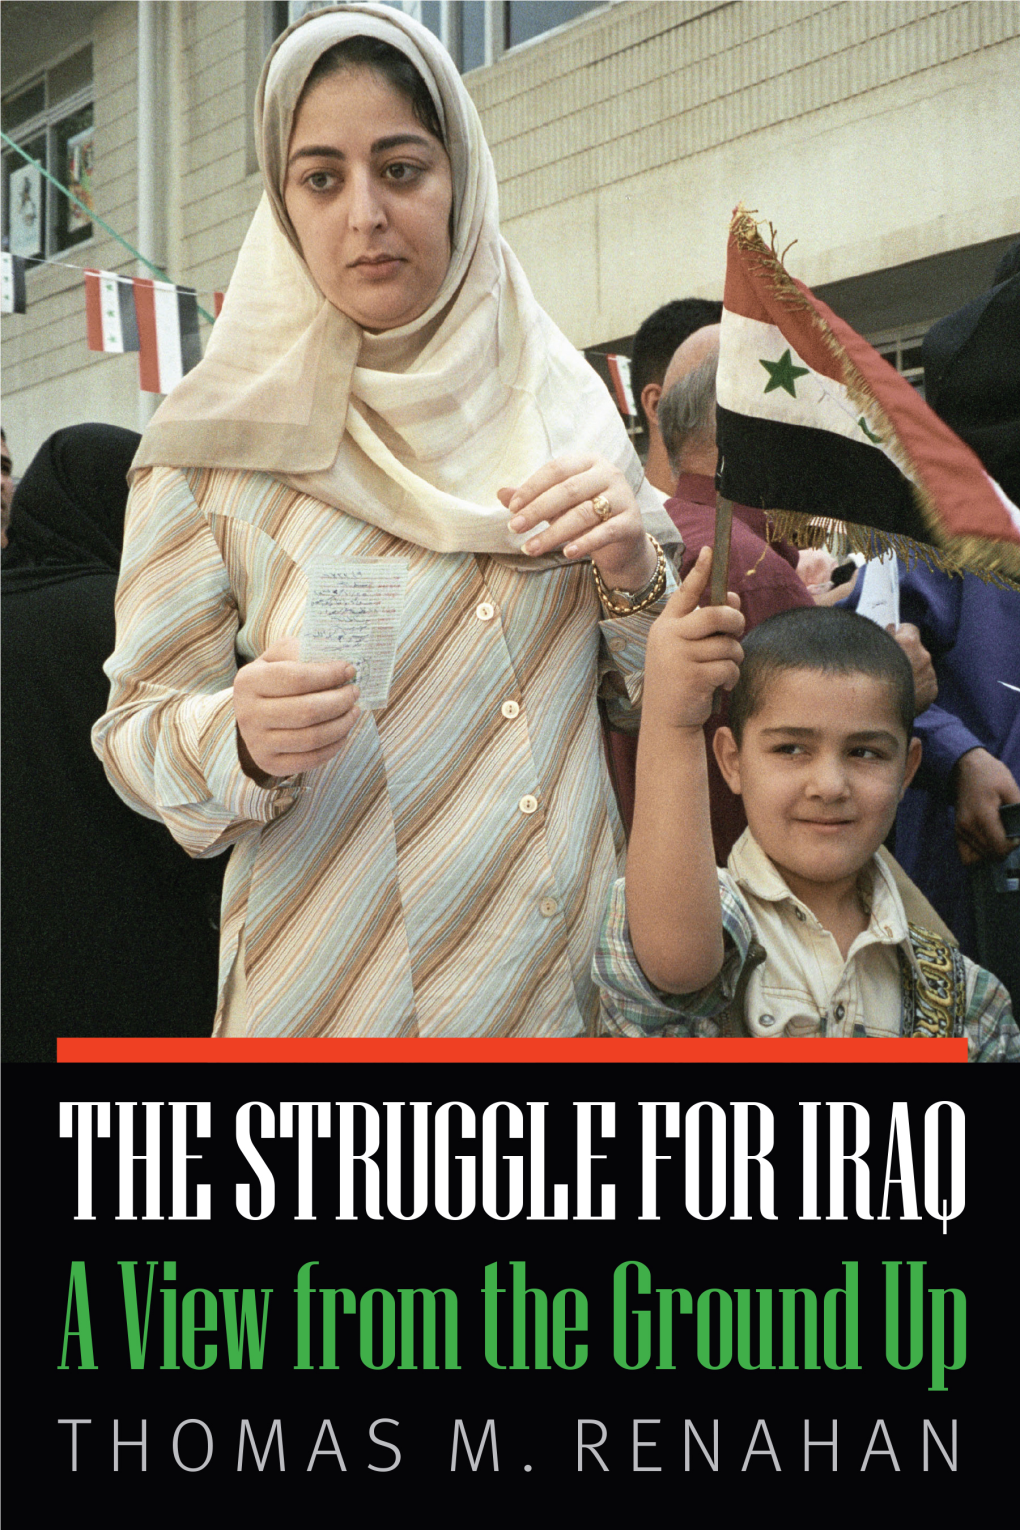 The Struggle for Iraq: a View from the Ground up / Thomas M